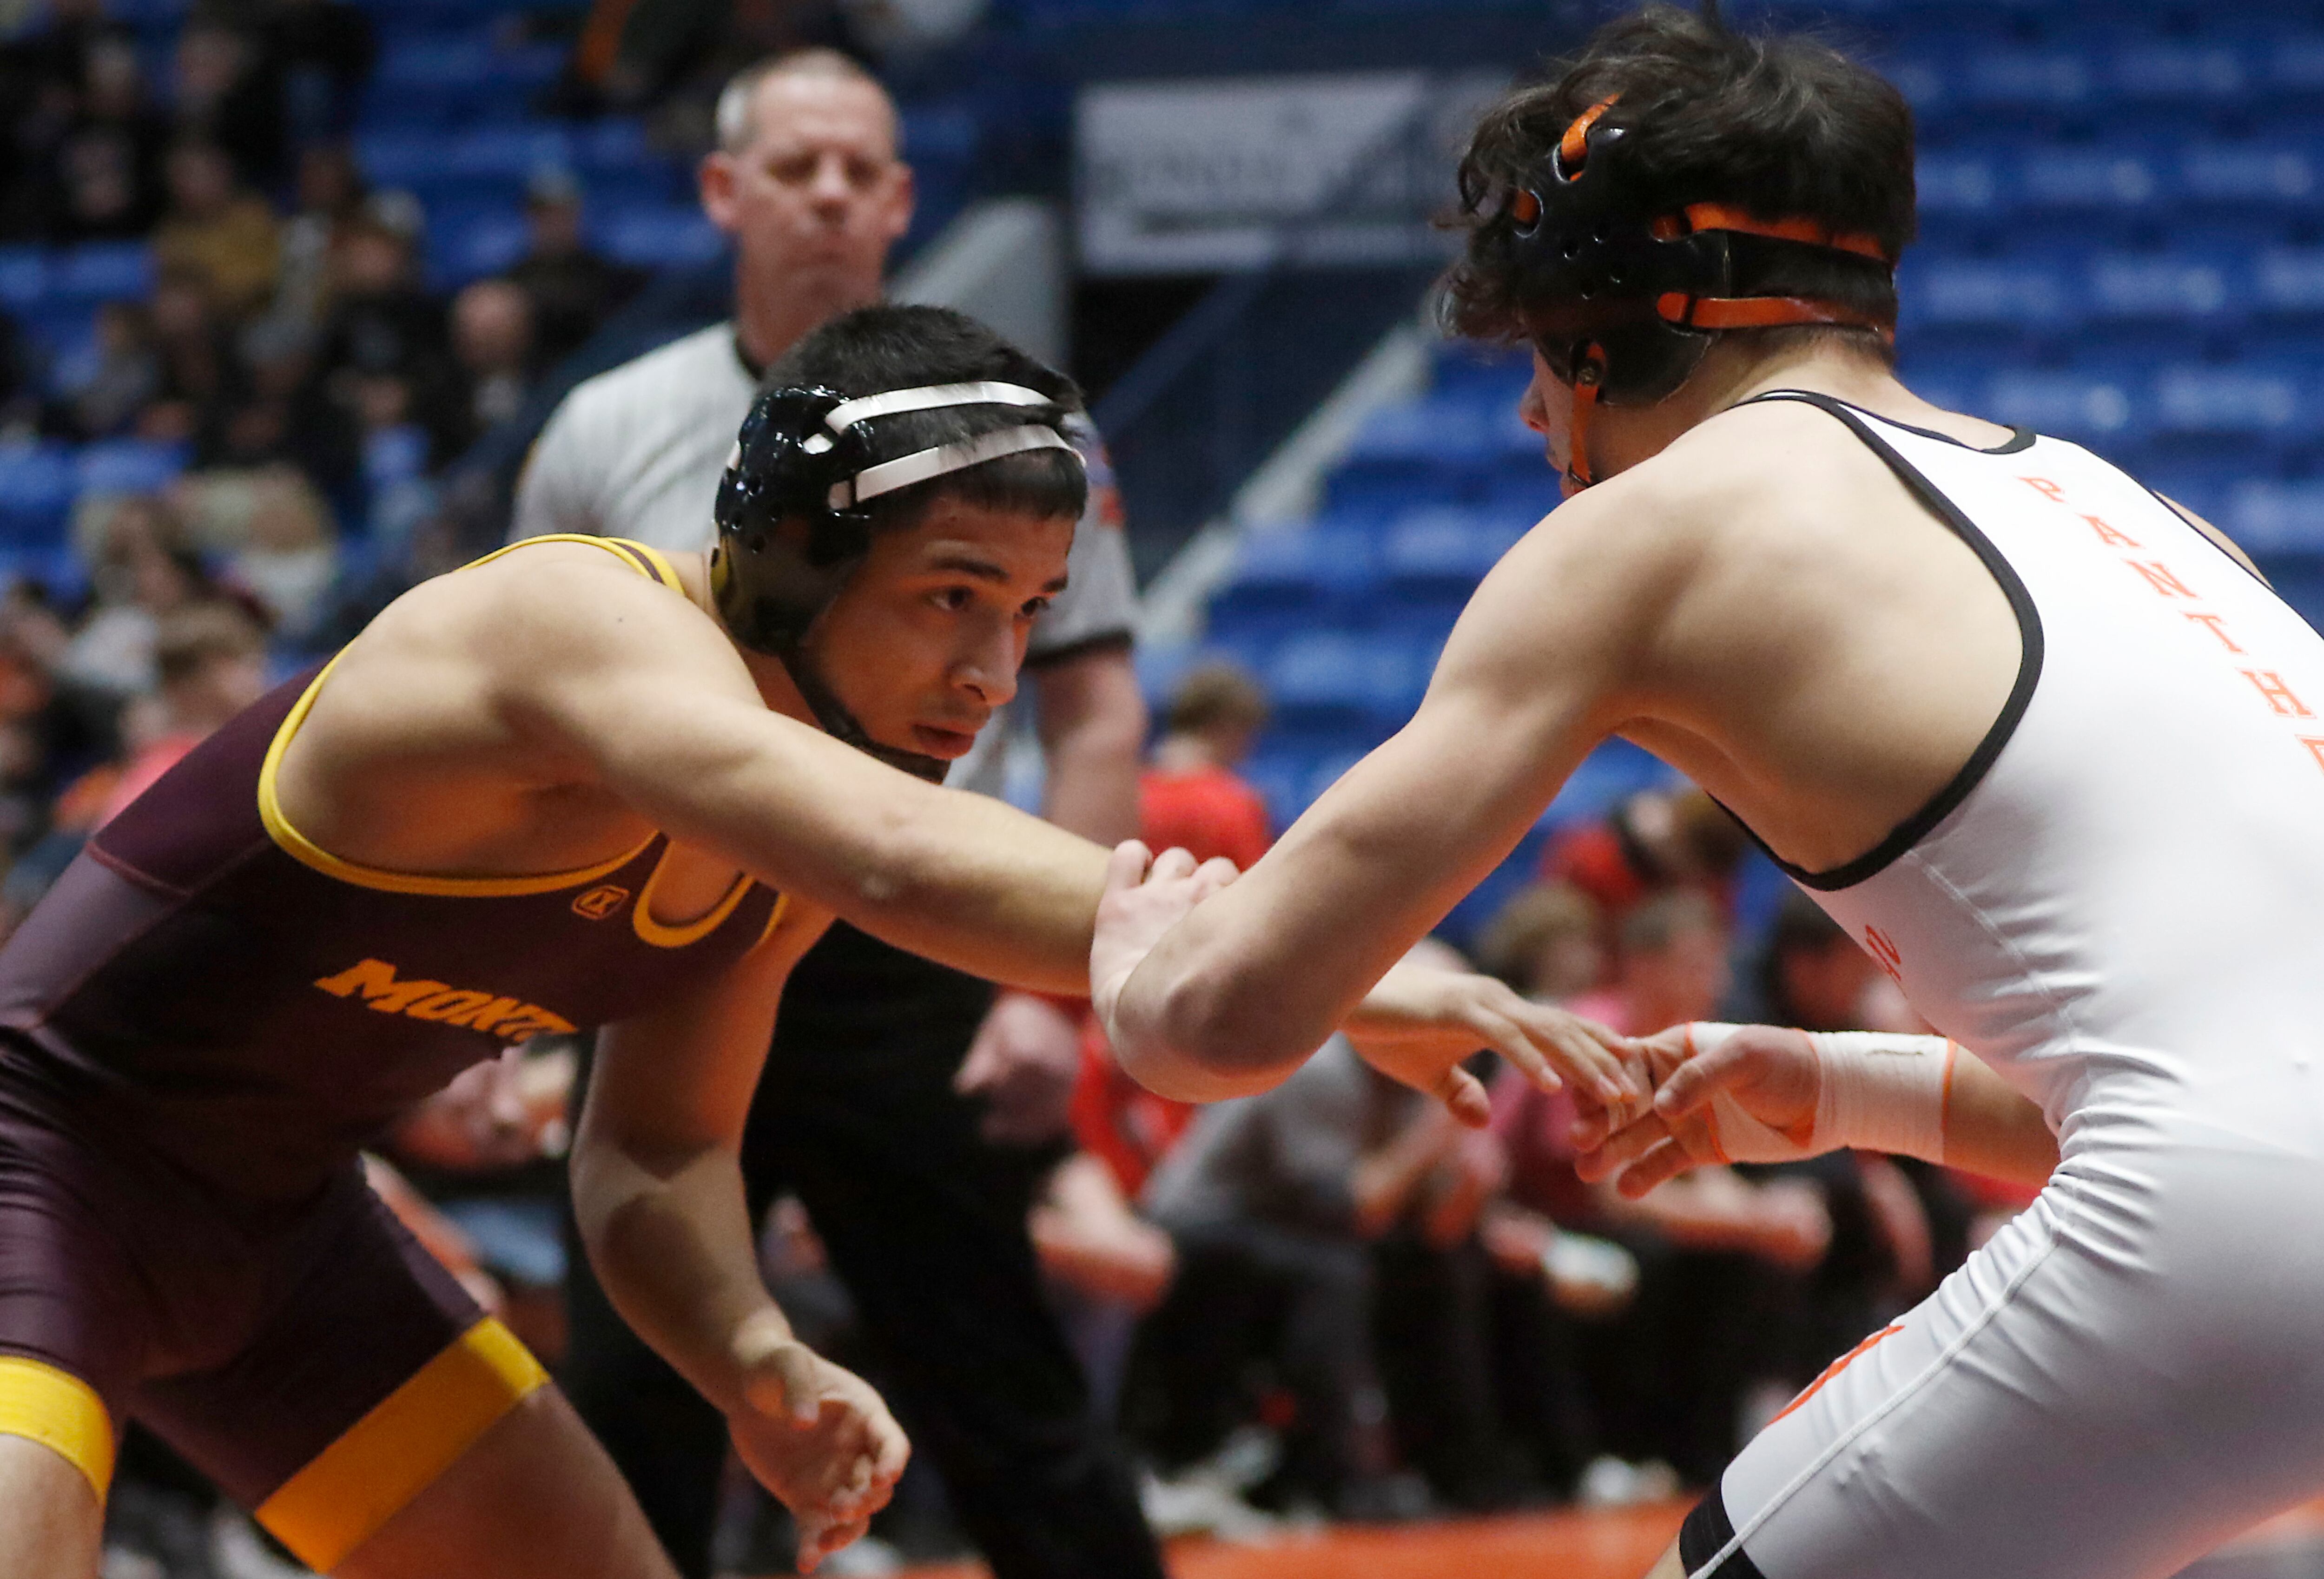 Boys wrestling: Montini’s quest for record 17th IHSA state championship comes up just short